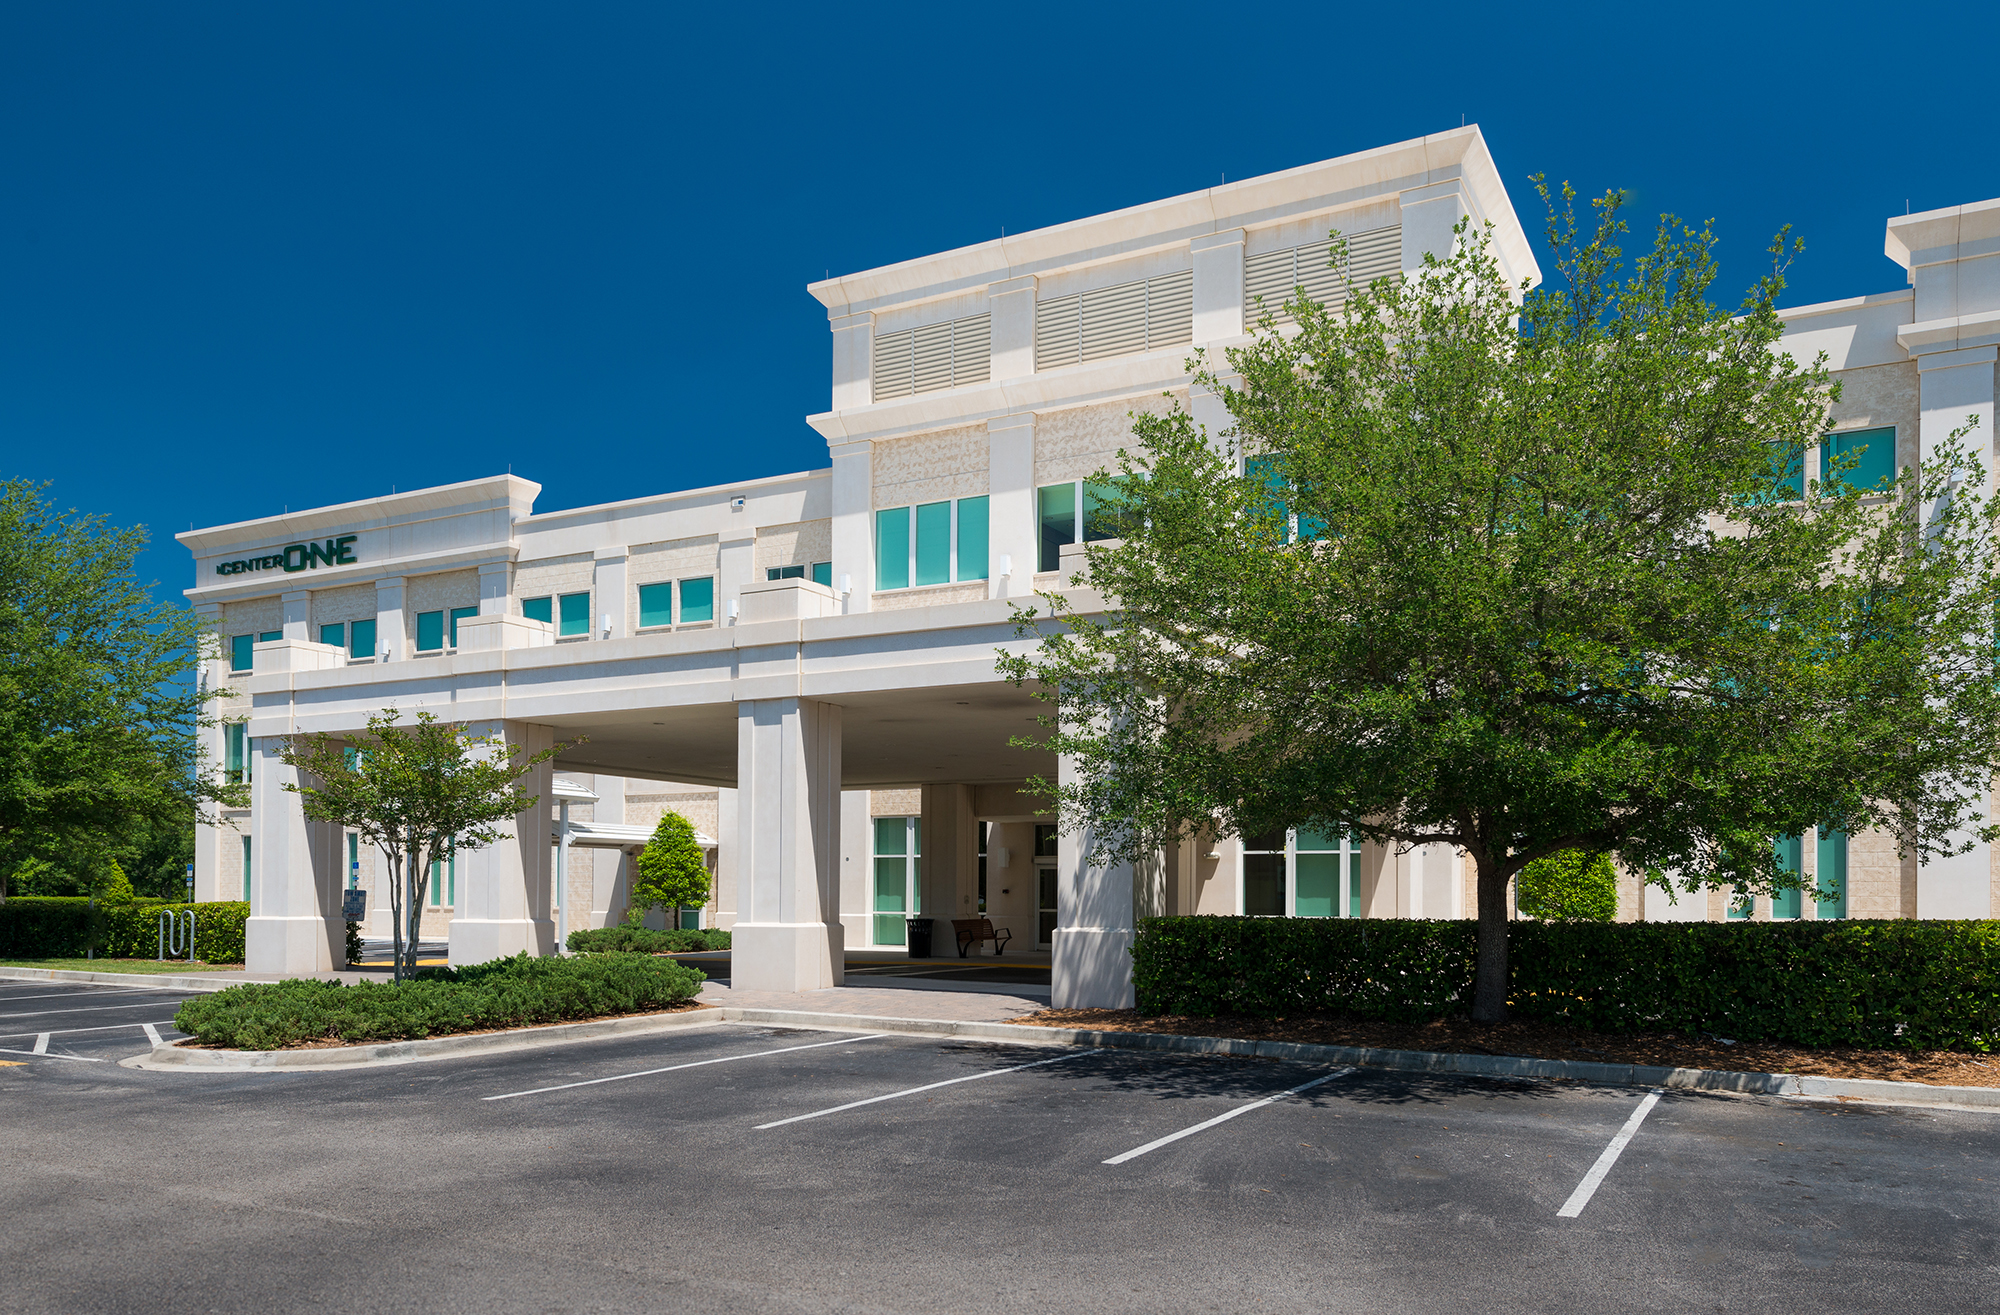 Viper Ventures’ listed address is 10475 Centurion Parkway, the location of one of Jacksonville Spine & Pain Centers’ four offices.